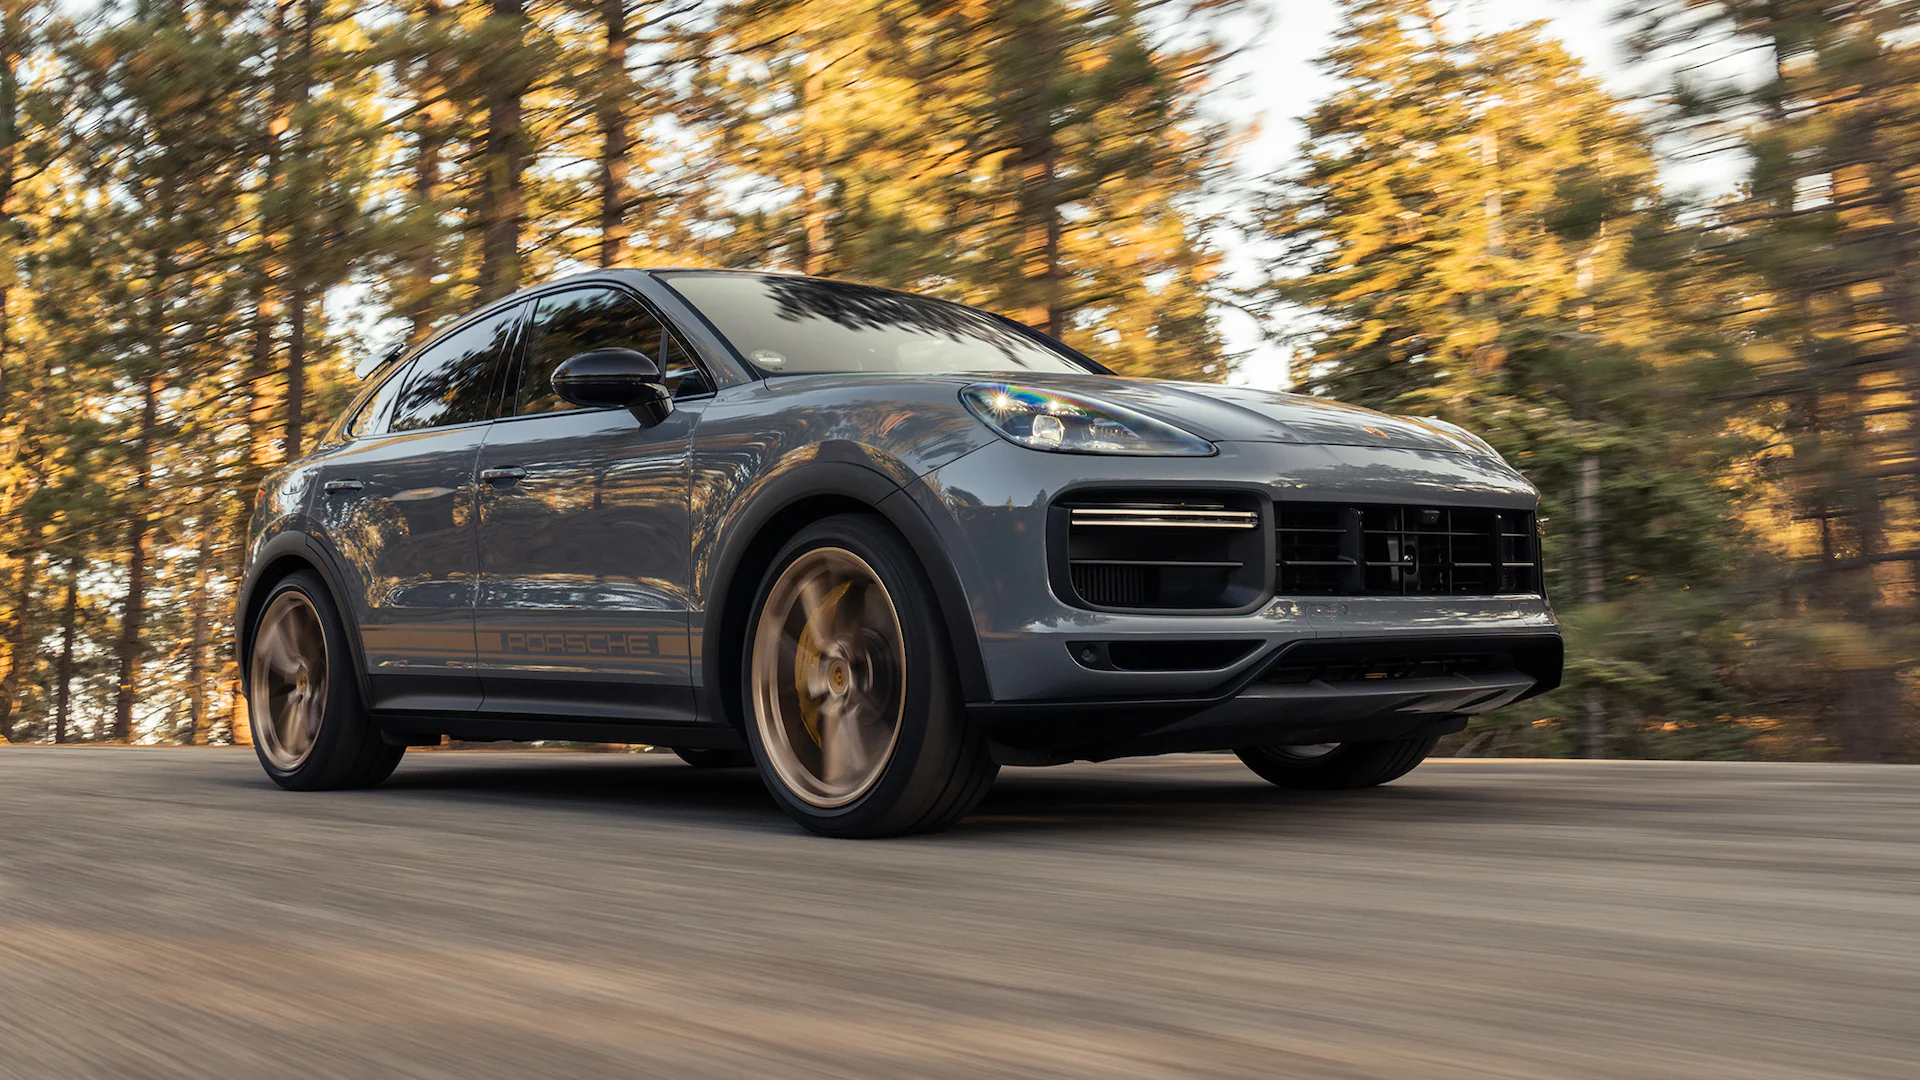 Porsche Cayenne Coupe Turbo GT front angular view in the motion